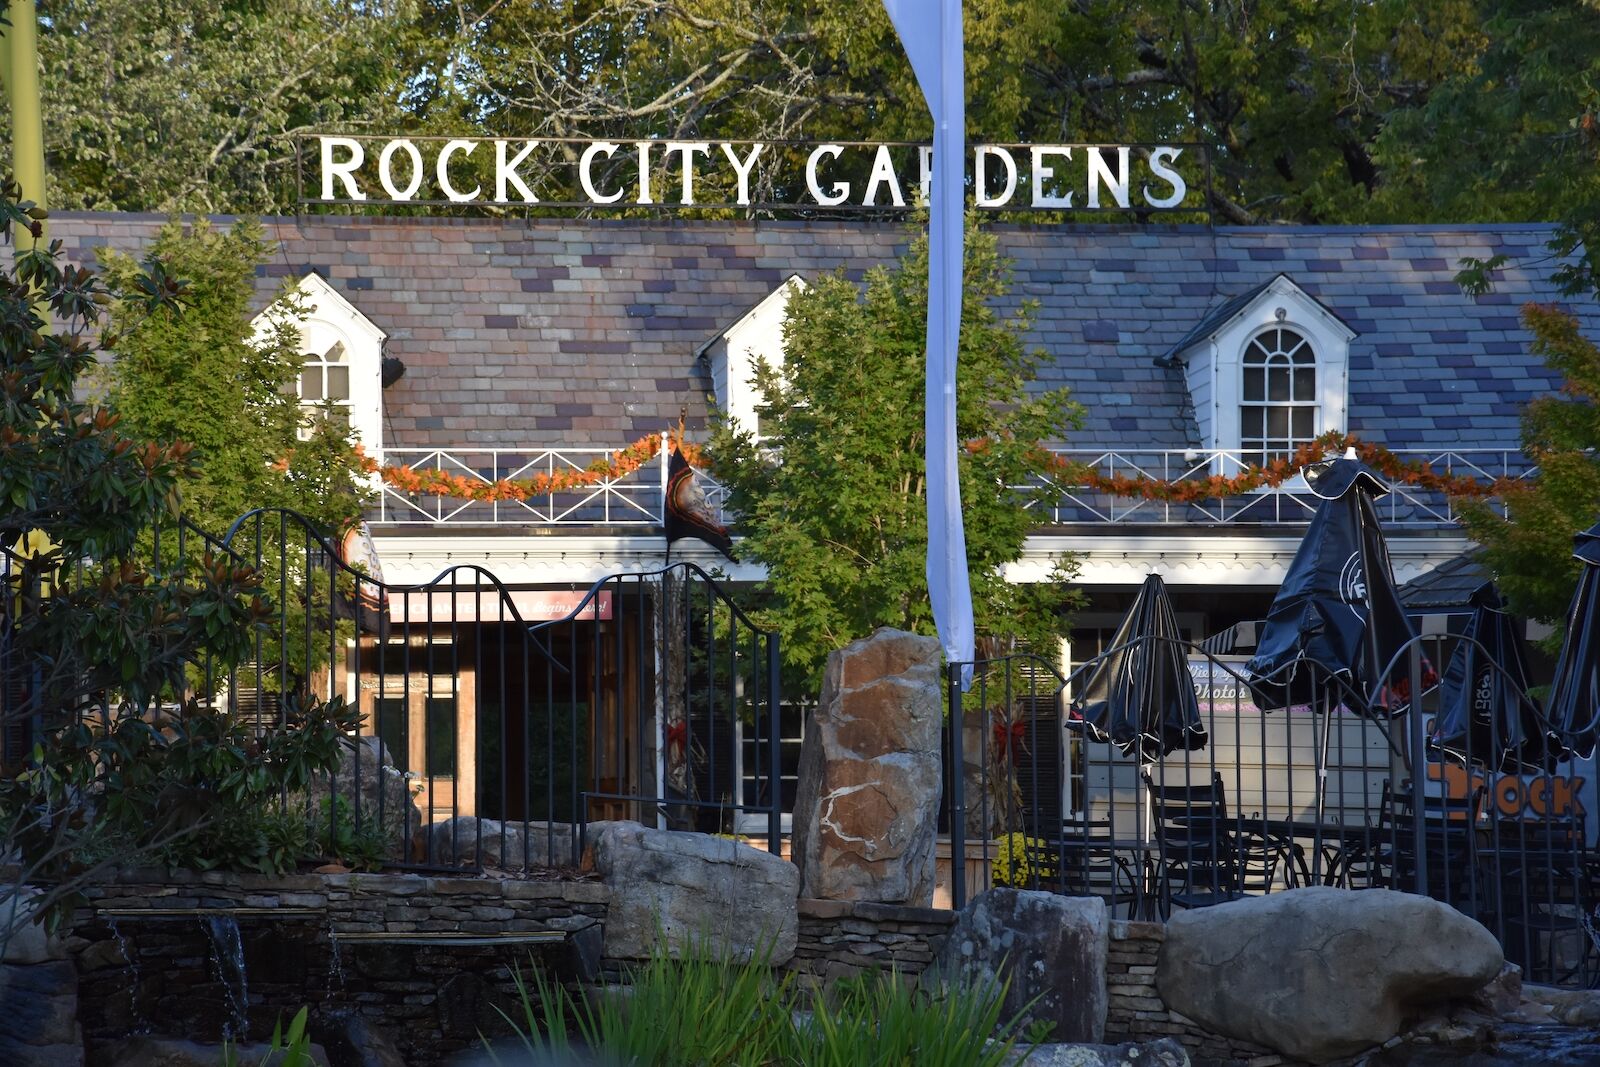 CHATTANOOGA TN - OCT 4: Rock City Gardens in Chattanooga, Tennessee, as seen on Oct 4, 2016.